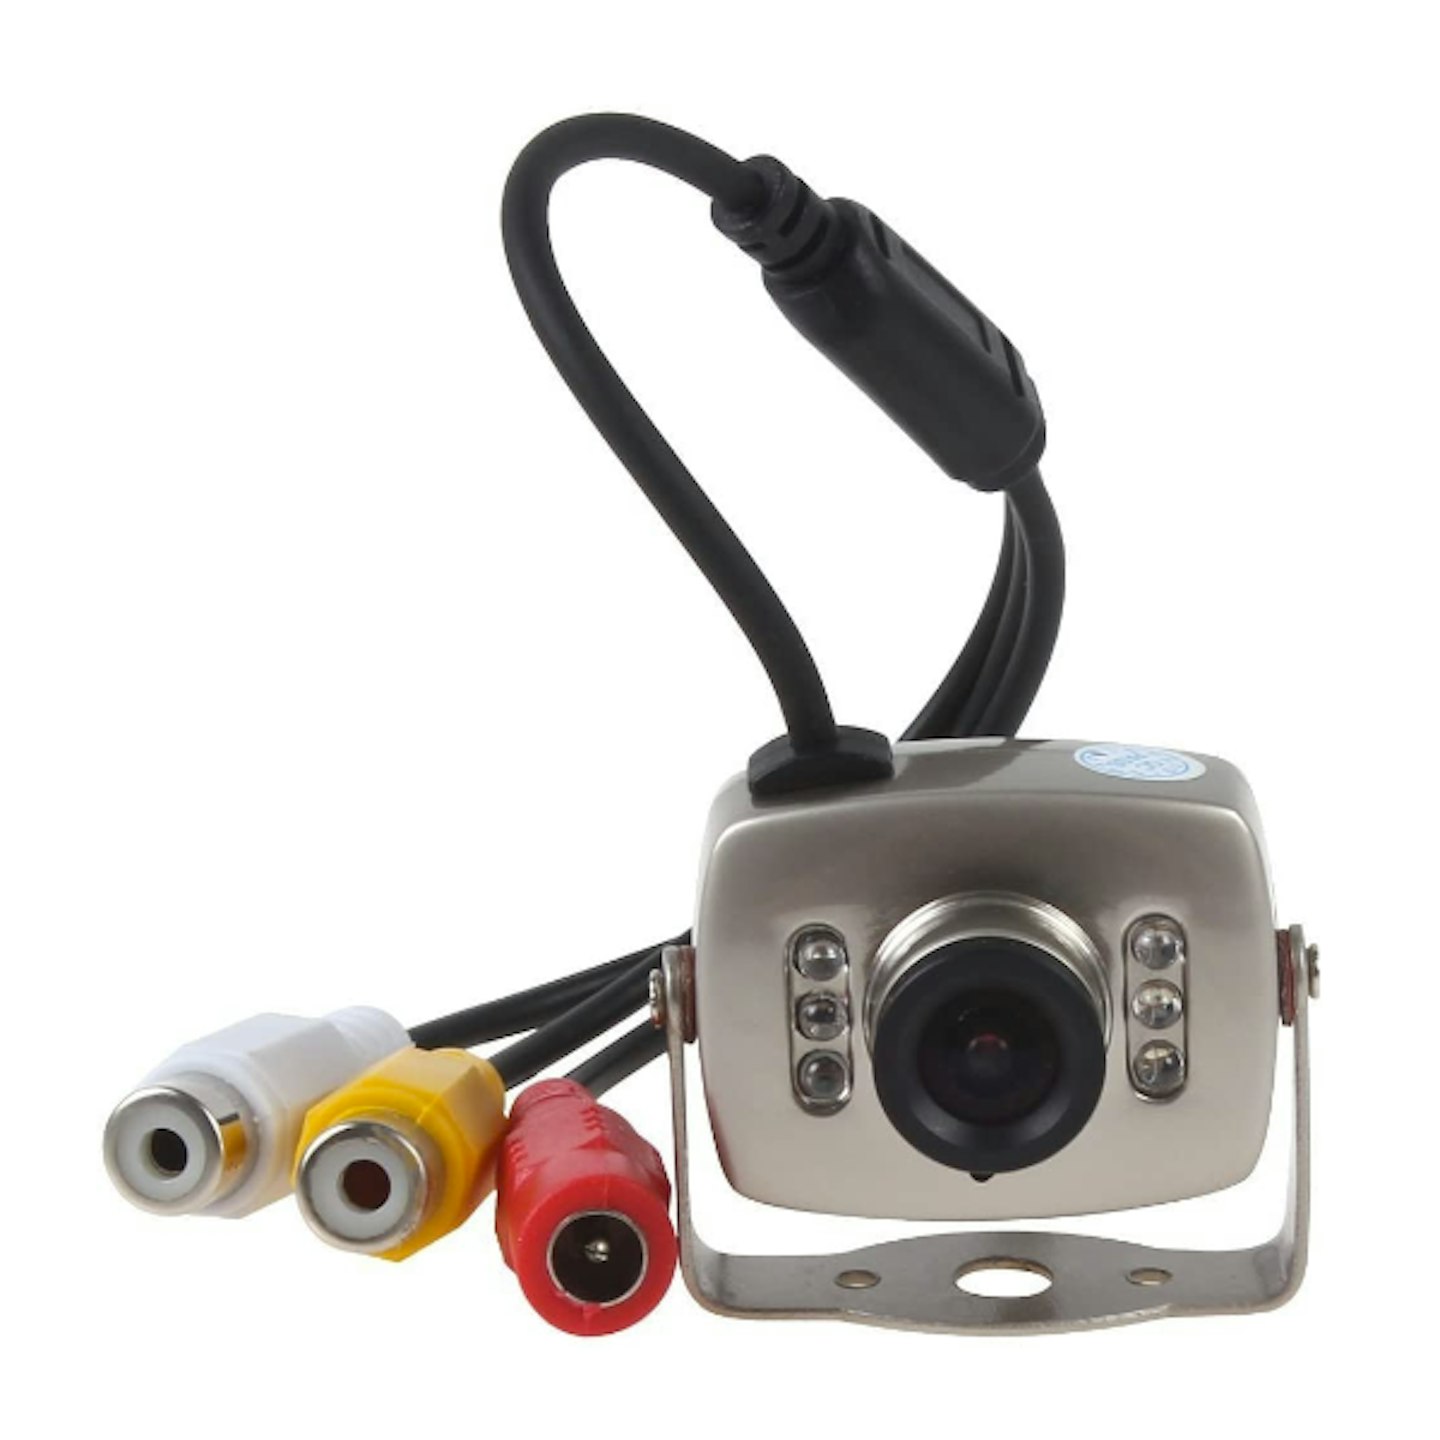 BW CCTV Camera with Infrared